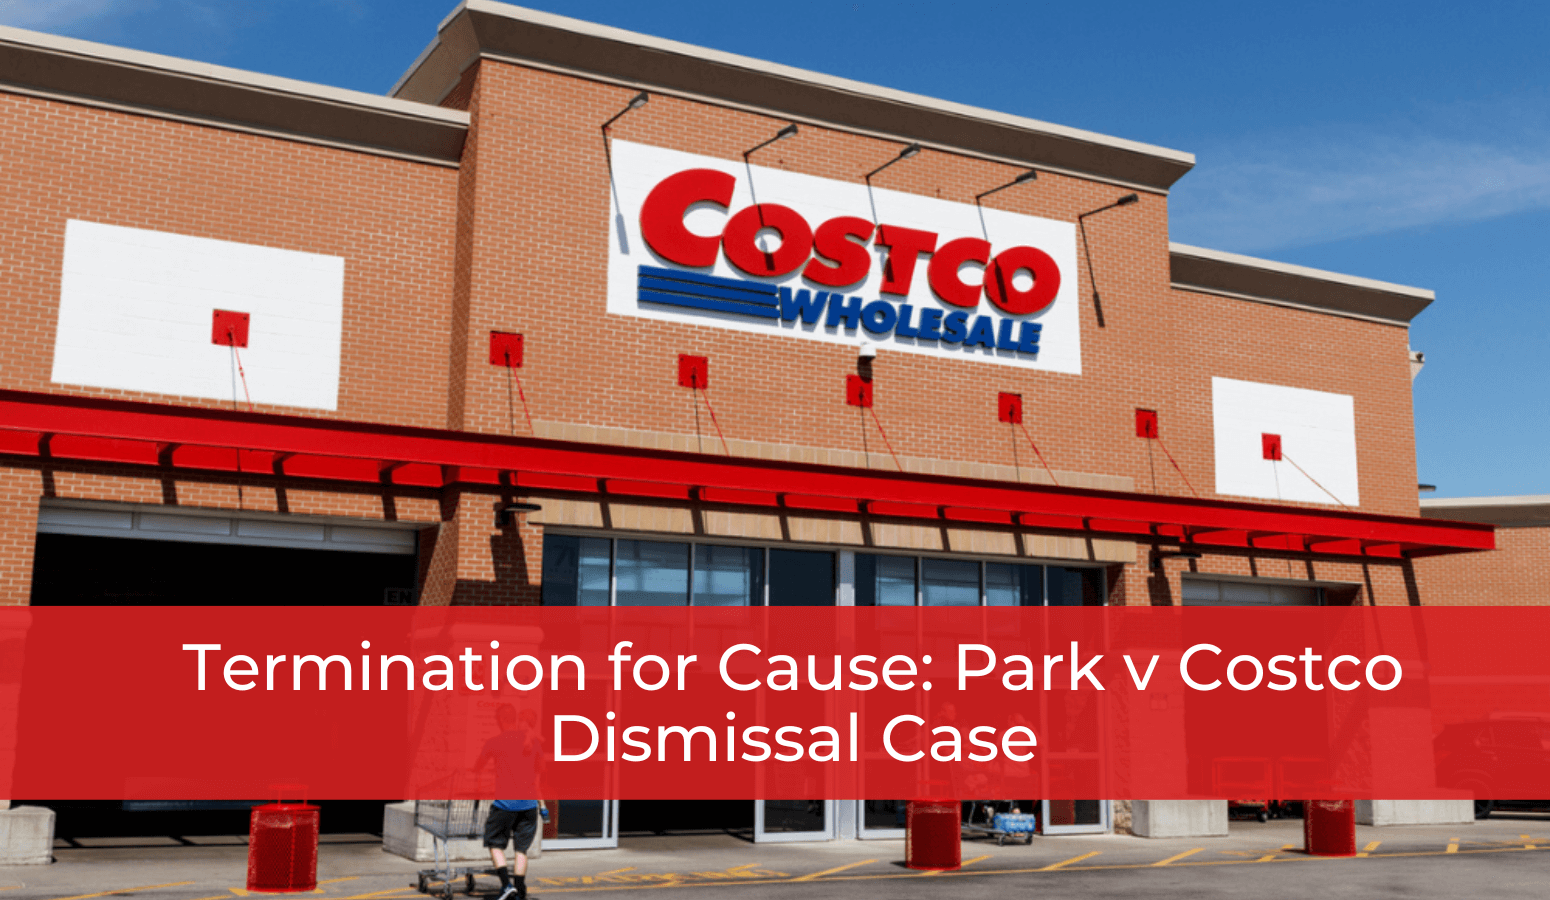 Featured image for “Termination for Cause: Park v Costco Dismissal Case”